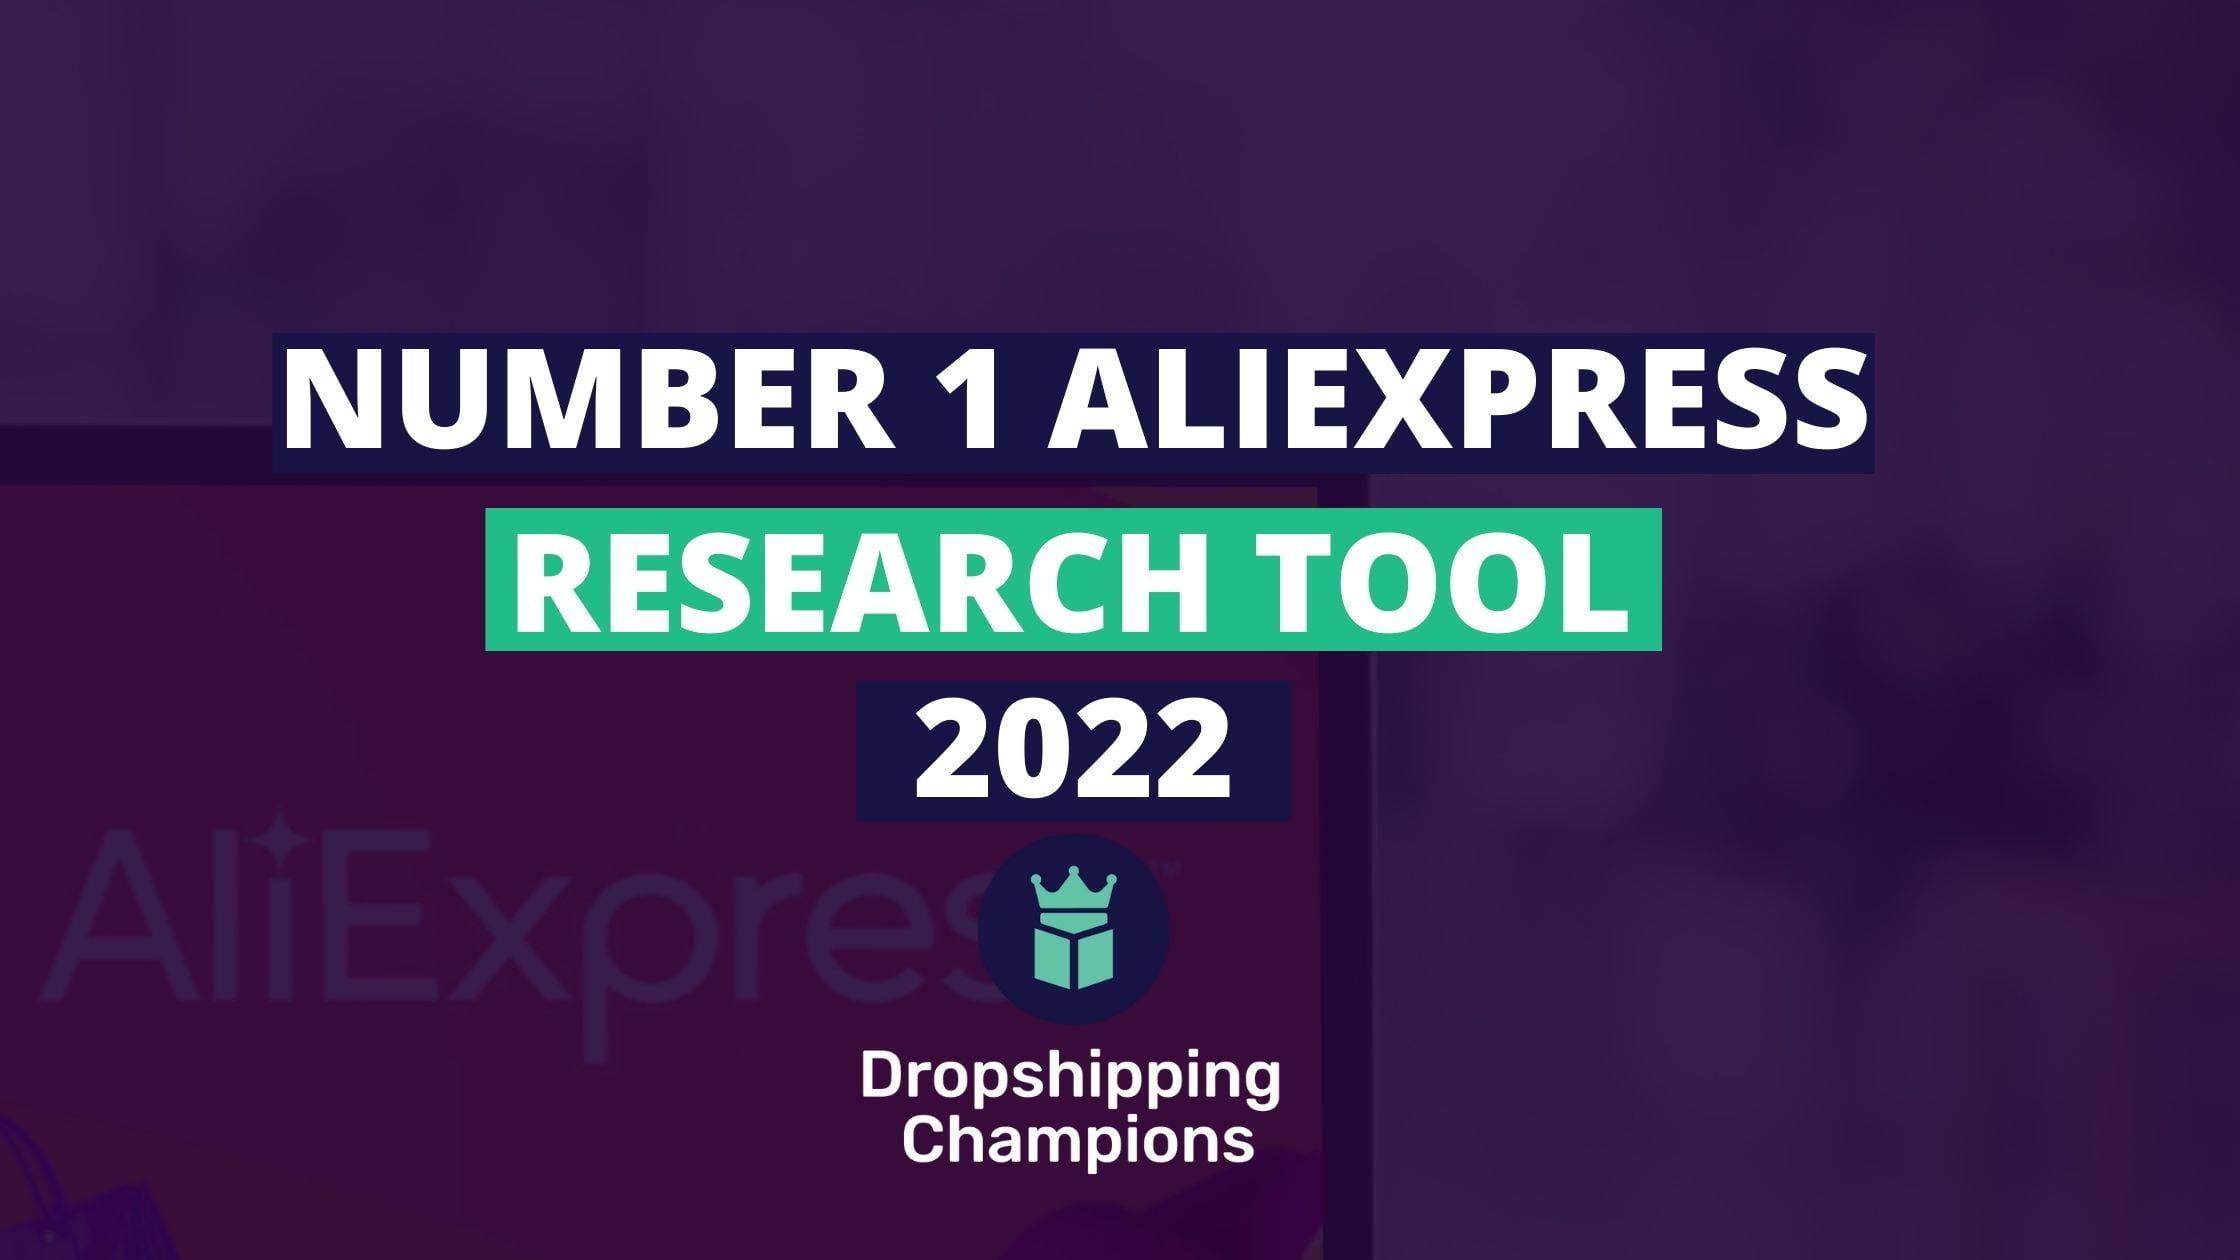 aliexpress product research tool